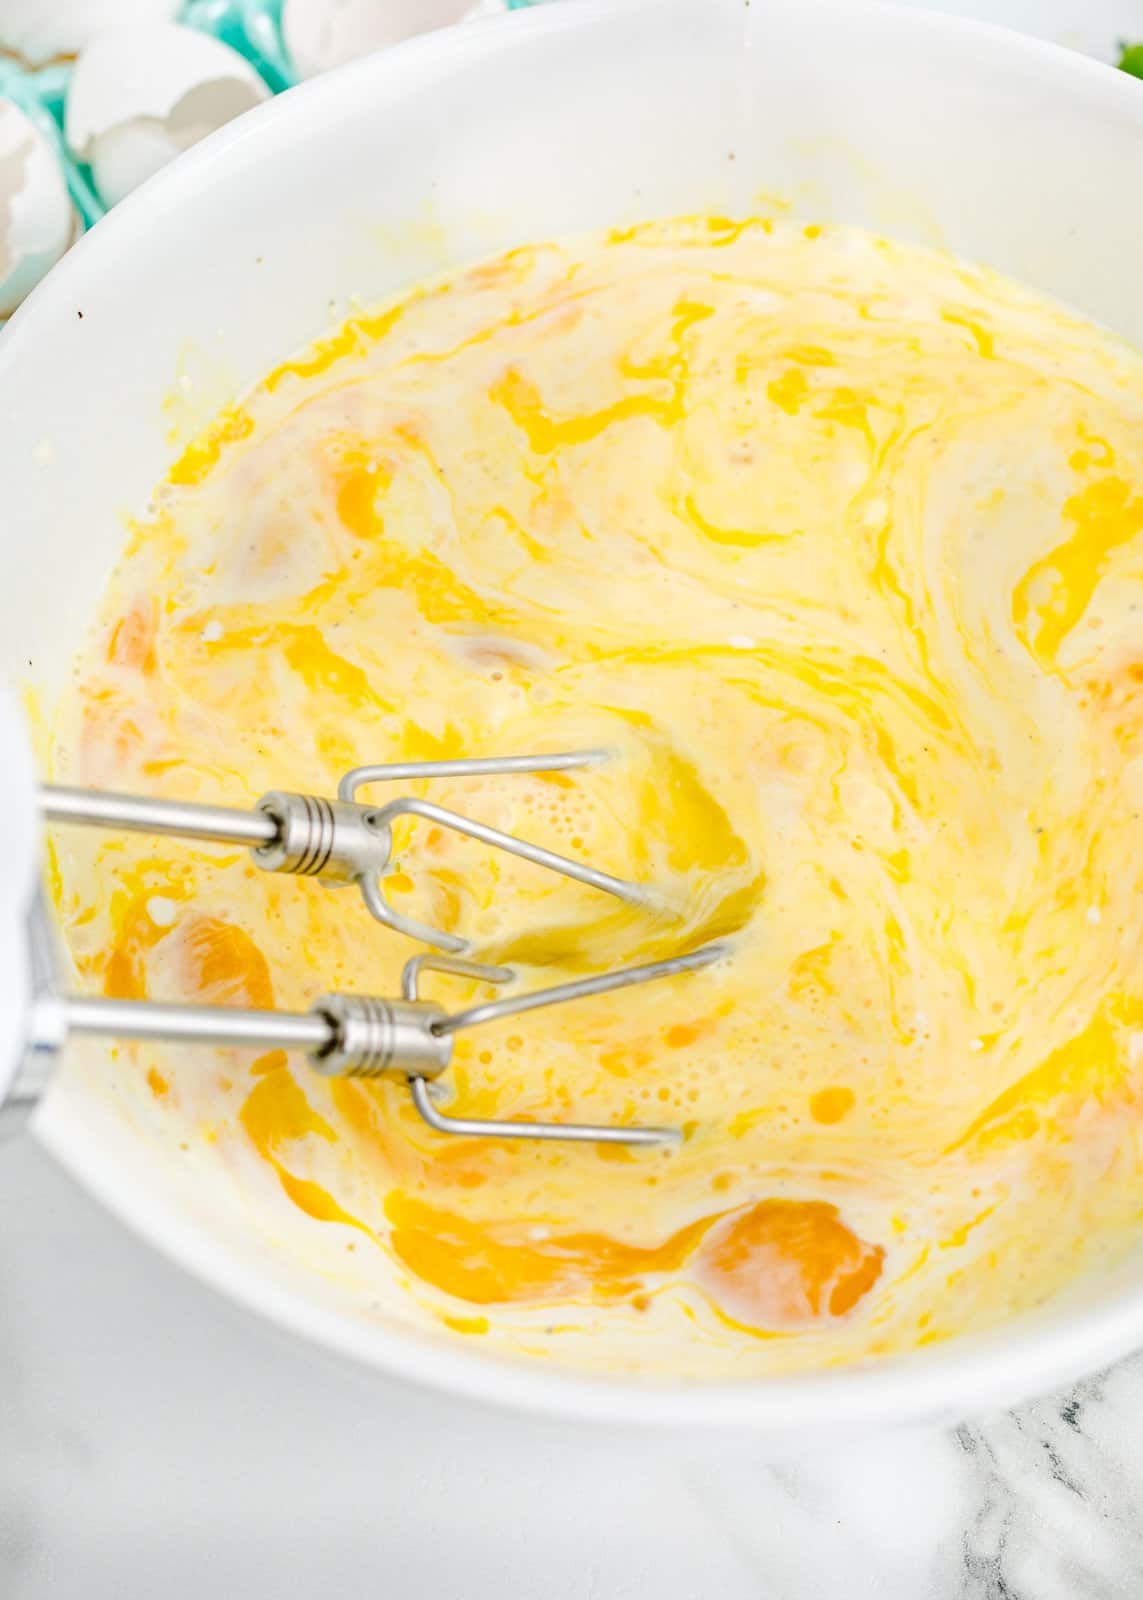 A mixing bowl with beaters and eggs being mixed.